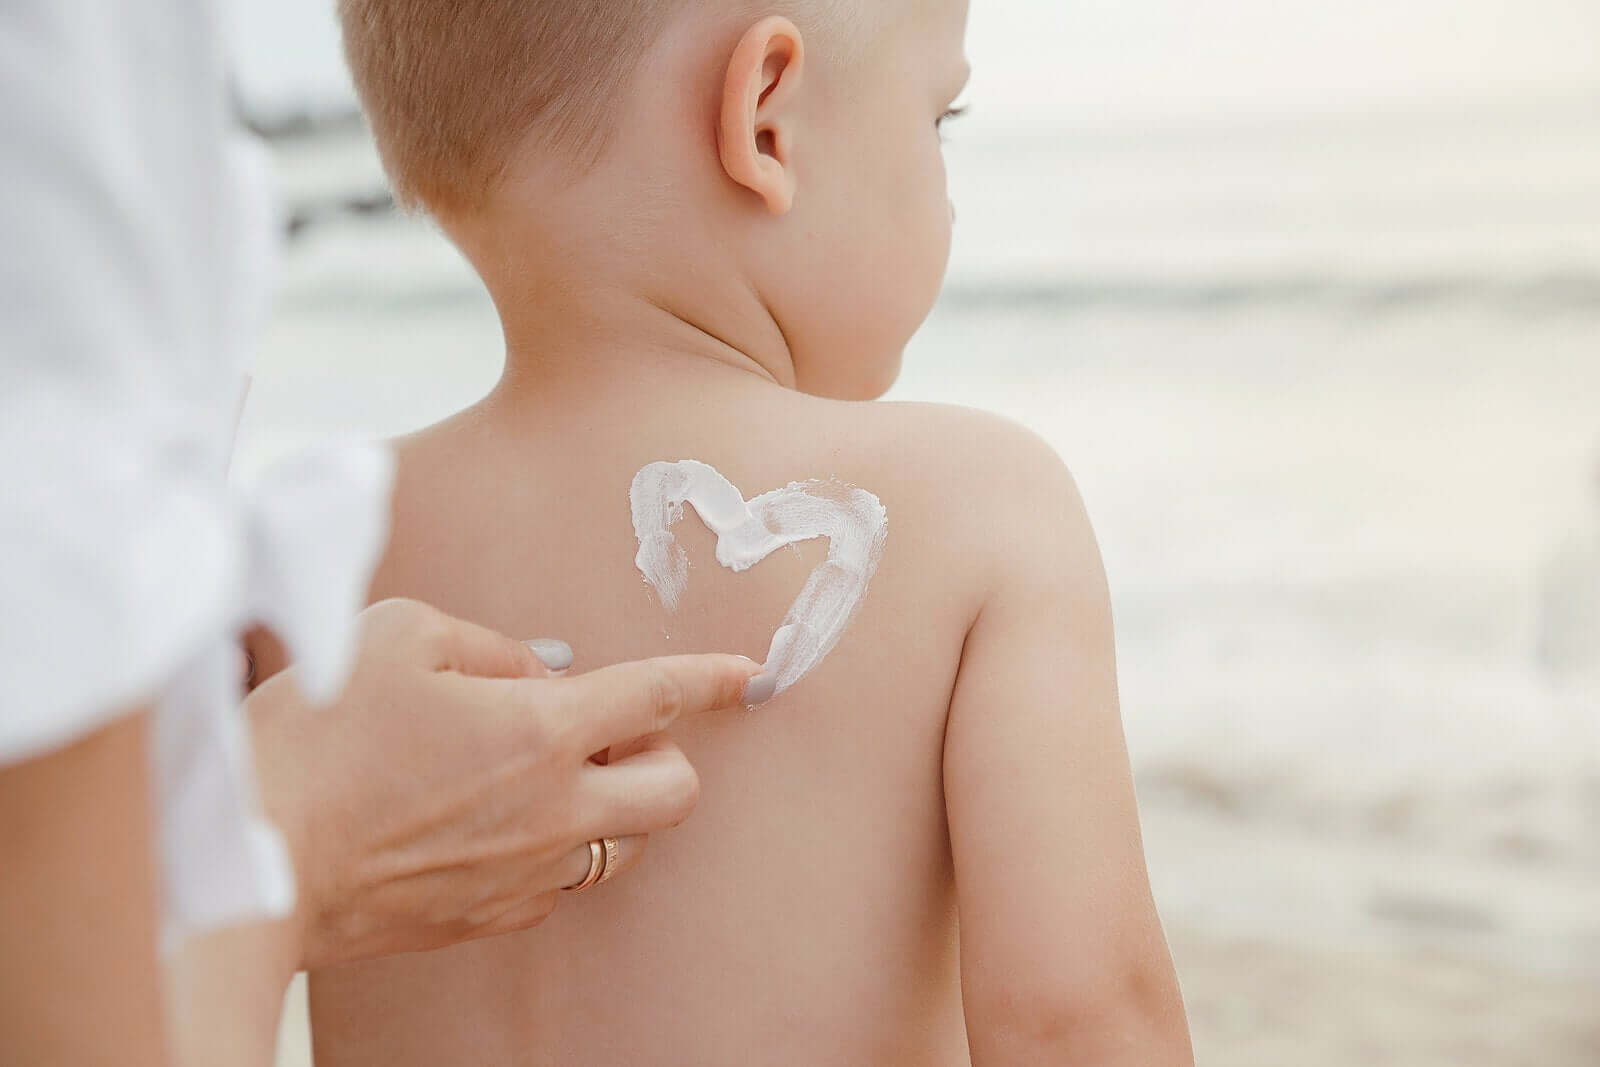 A mother applying sunscreen to her child's back in the shape of a heart.